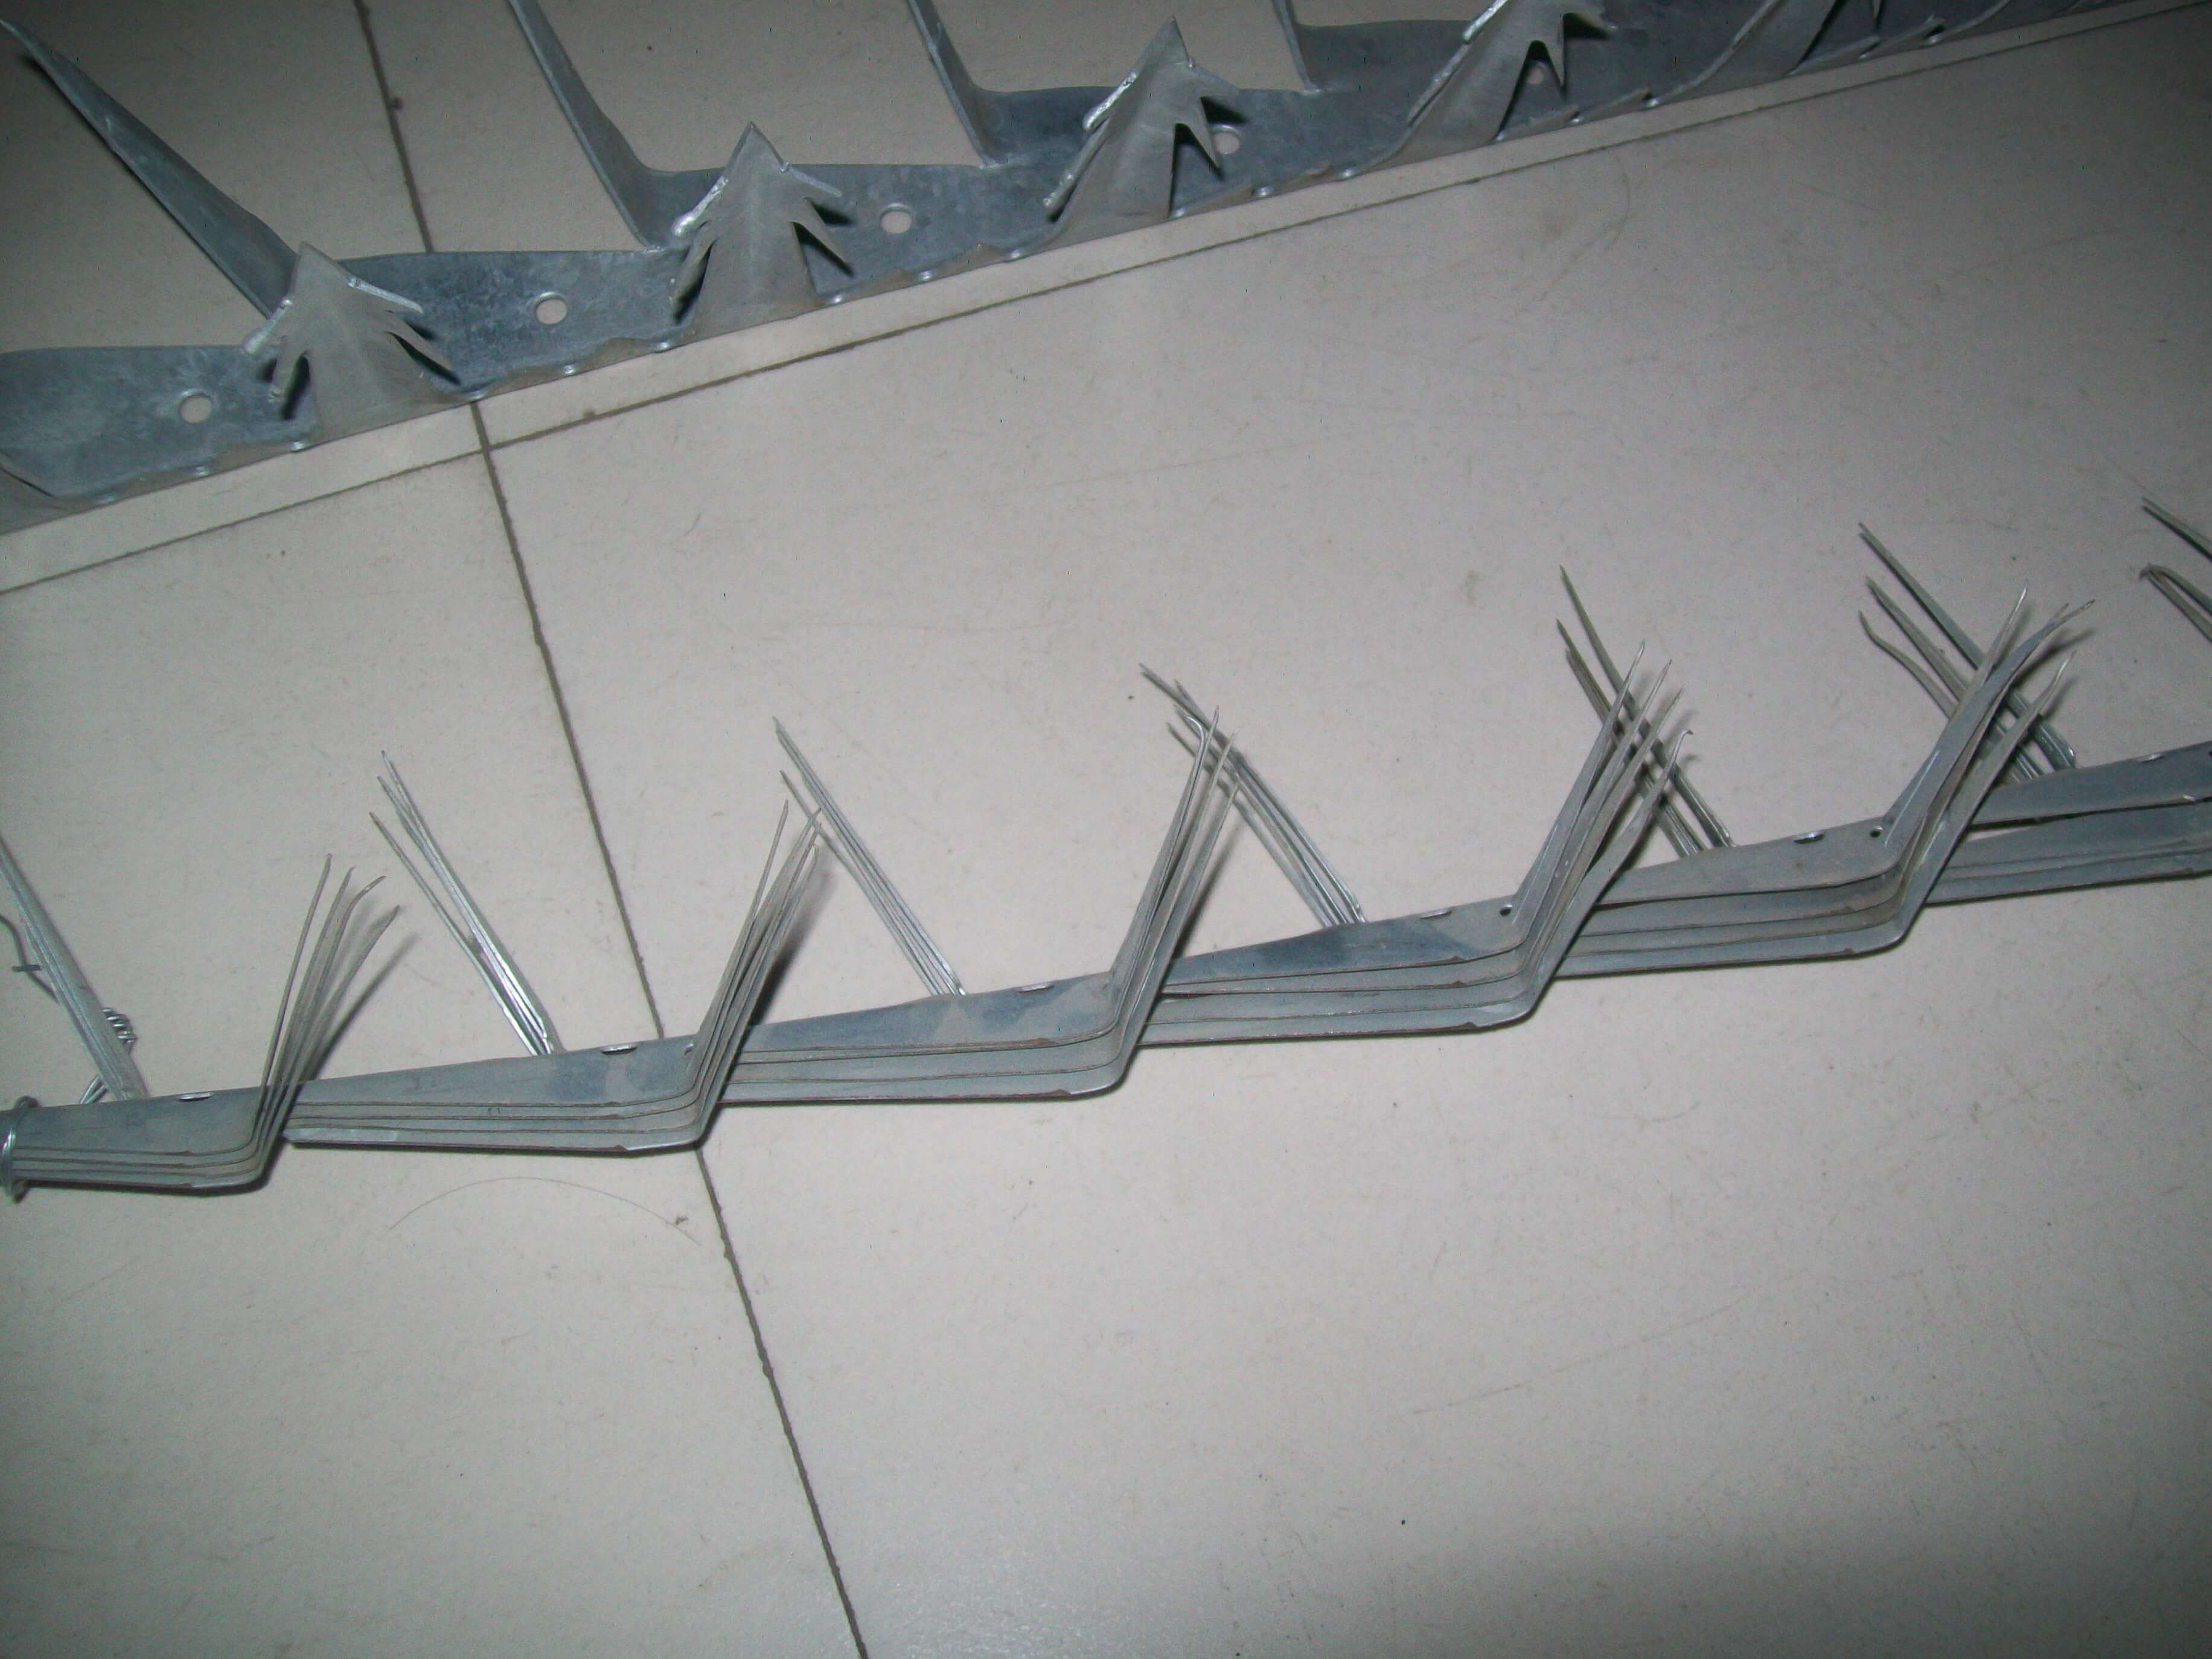 Protect Your Home or Business with Security Spike Strips